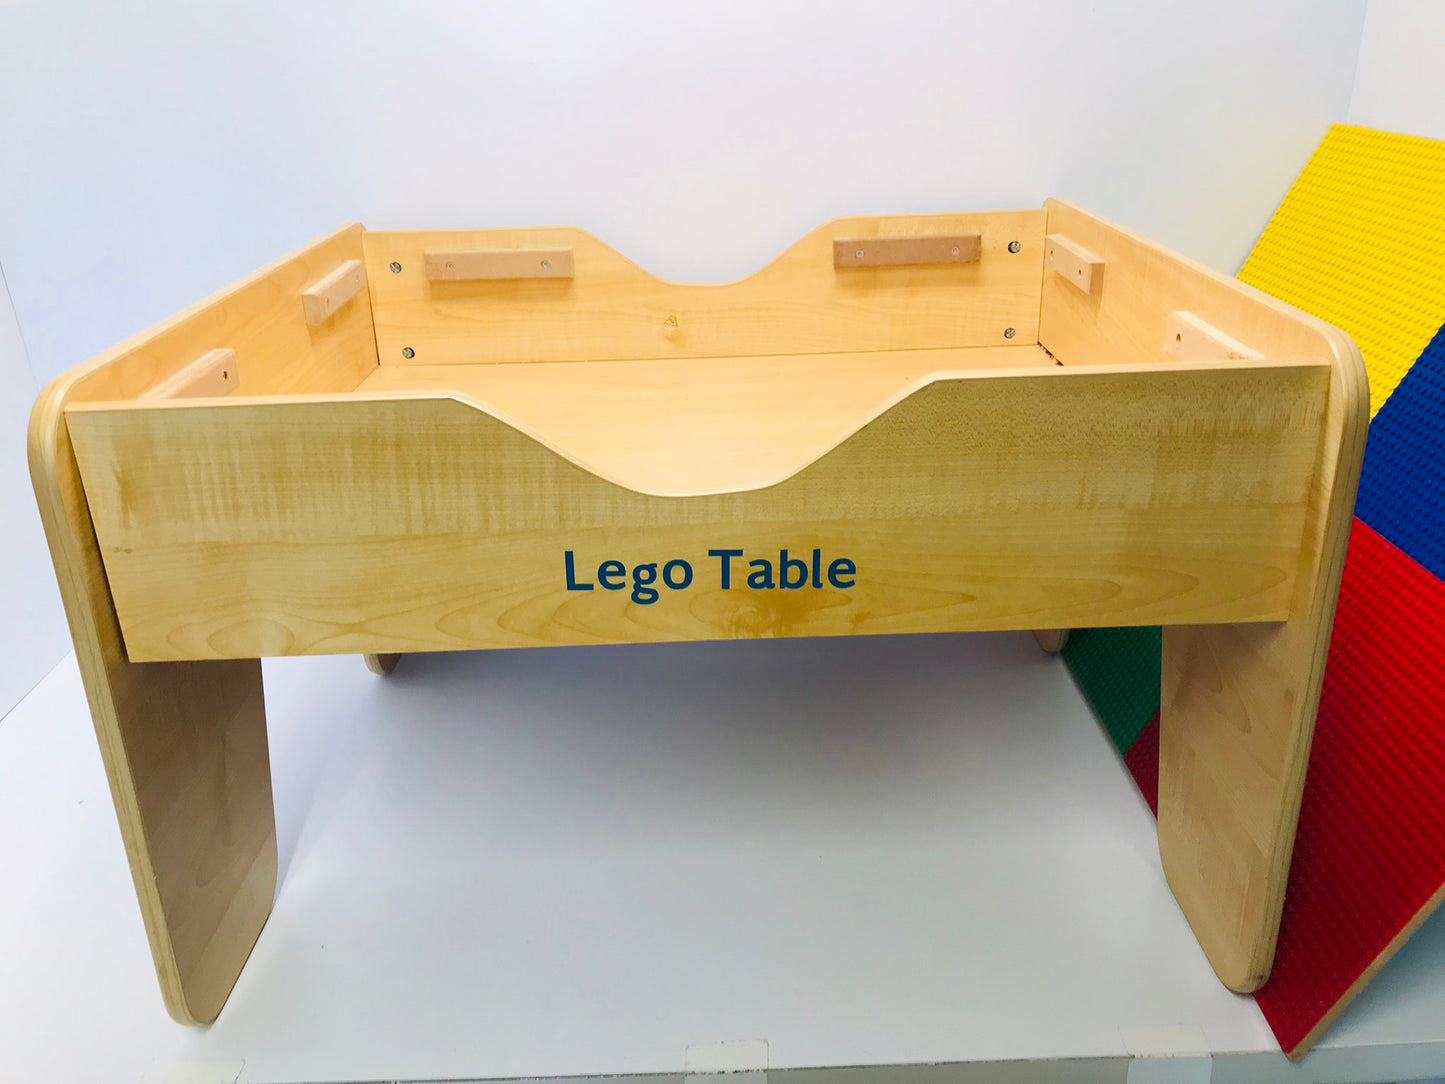 Lego KidKraft Activity Table Ages 3+ Fits Regular Size and Duplo Size Lego